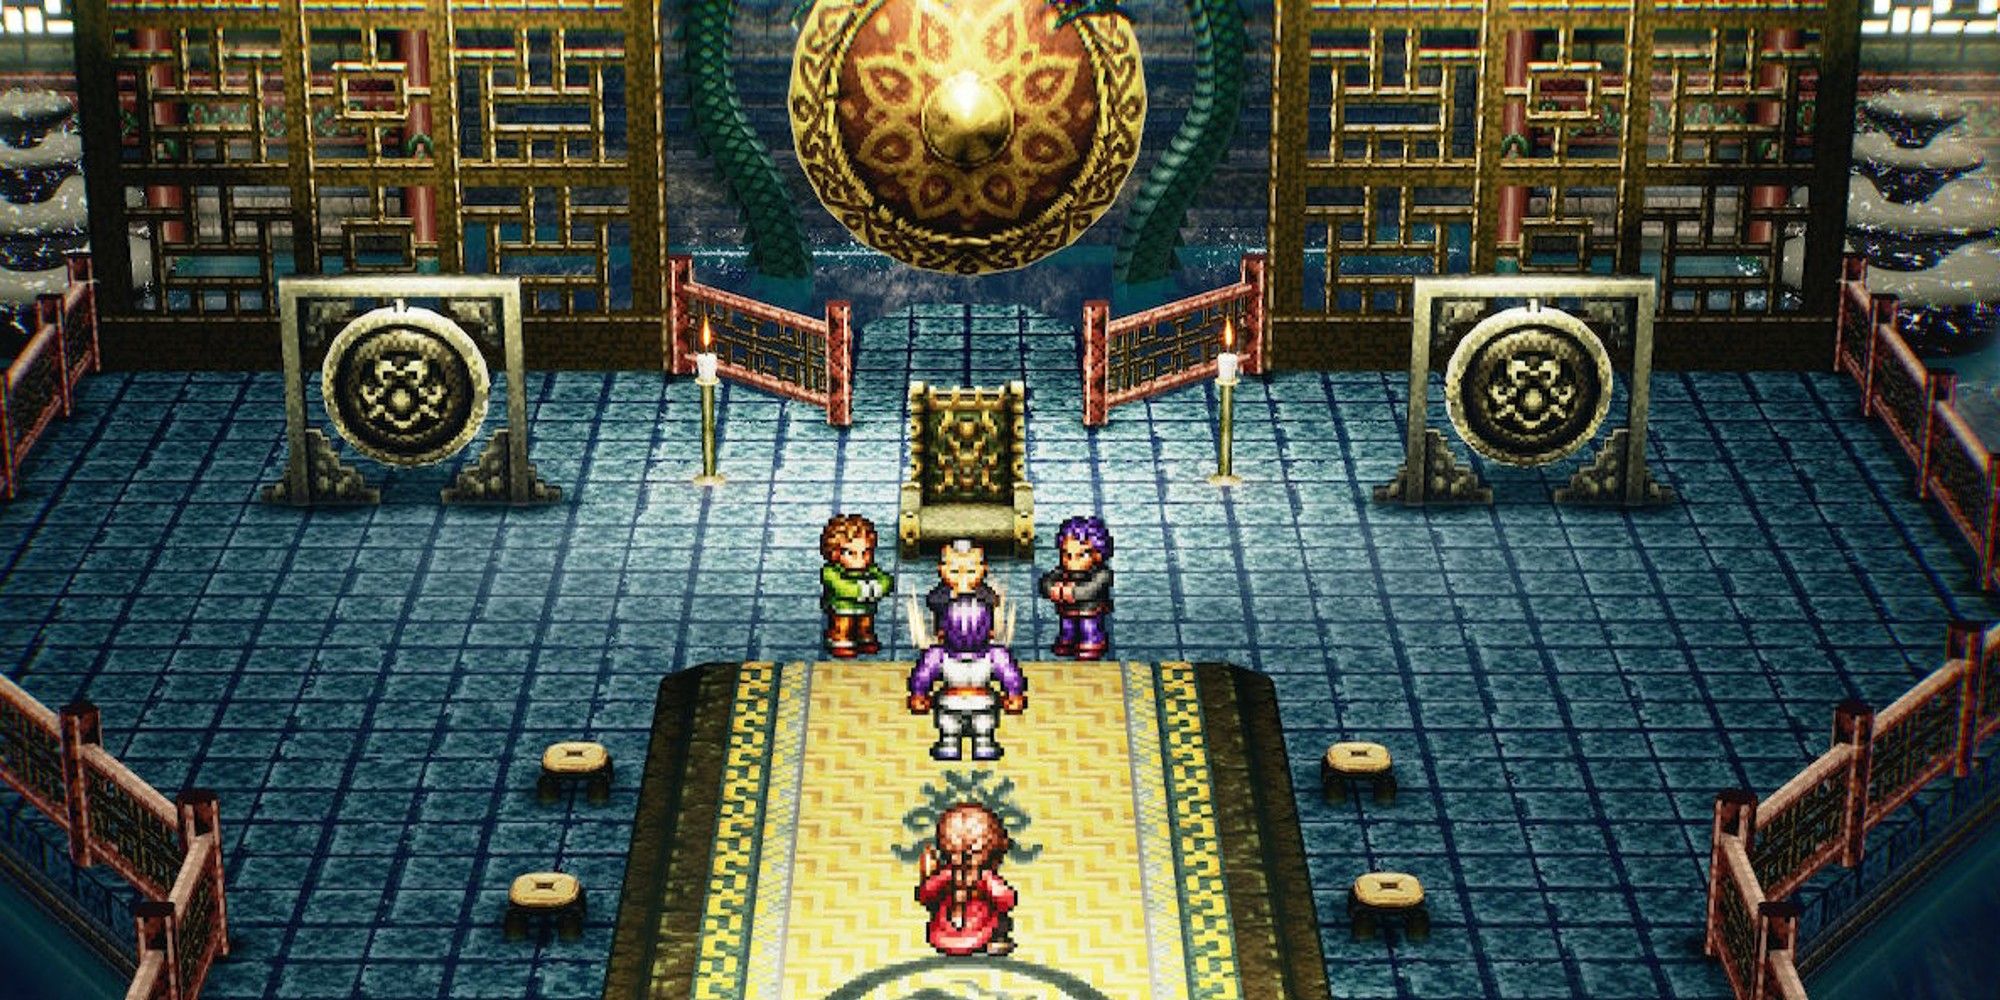 Characters facing off in a well decorated room in Imperial China chapter.